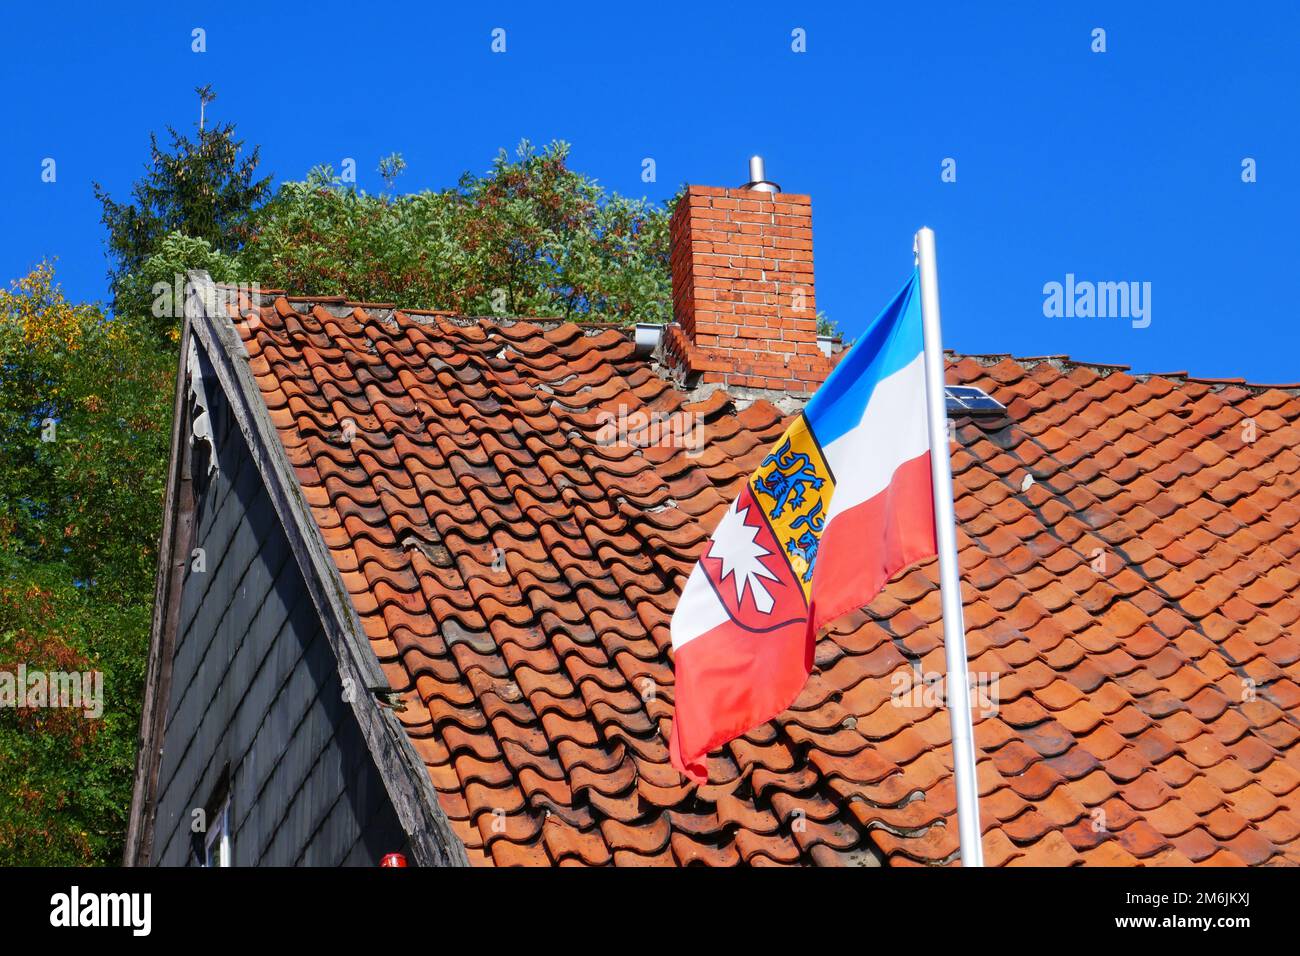 Hoisted flag of Schleswig Holstein in Lauenburg Germany Stock Photo